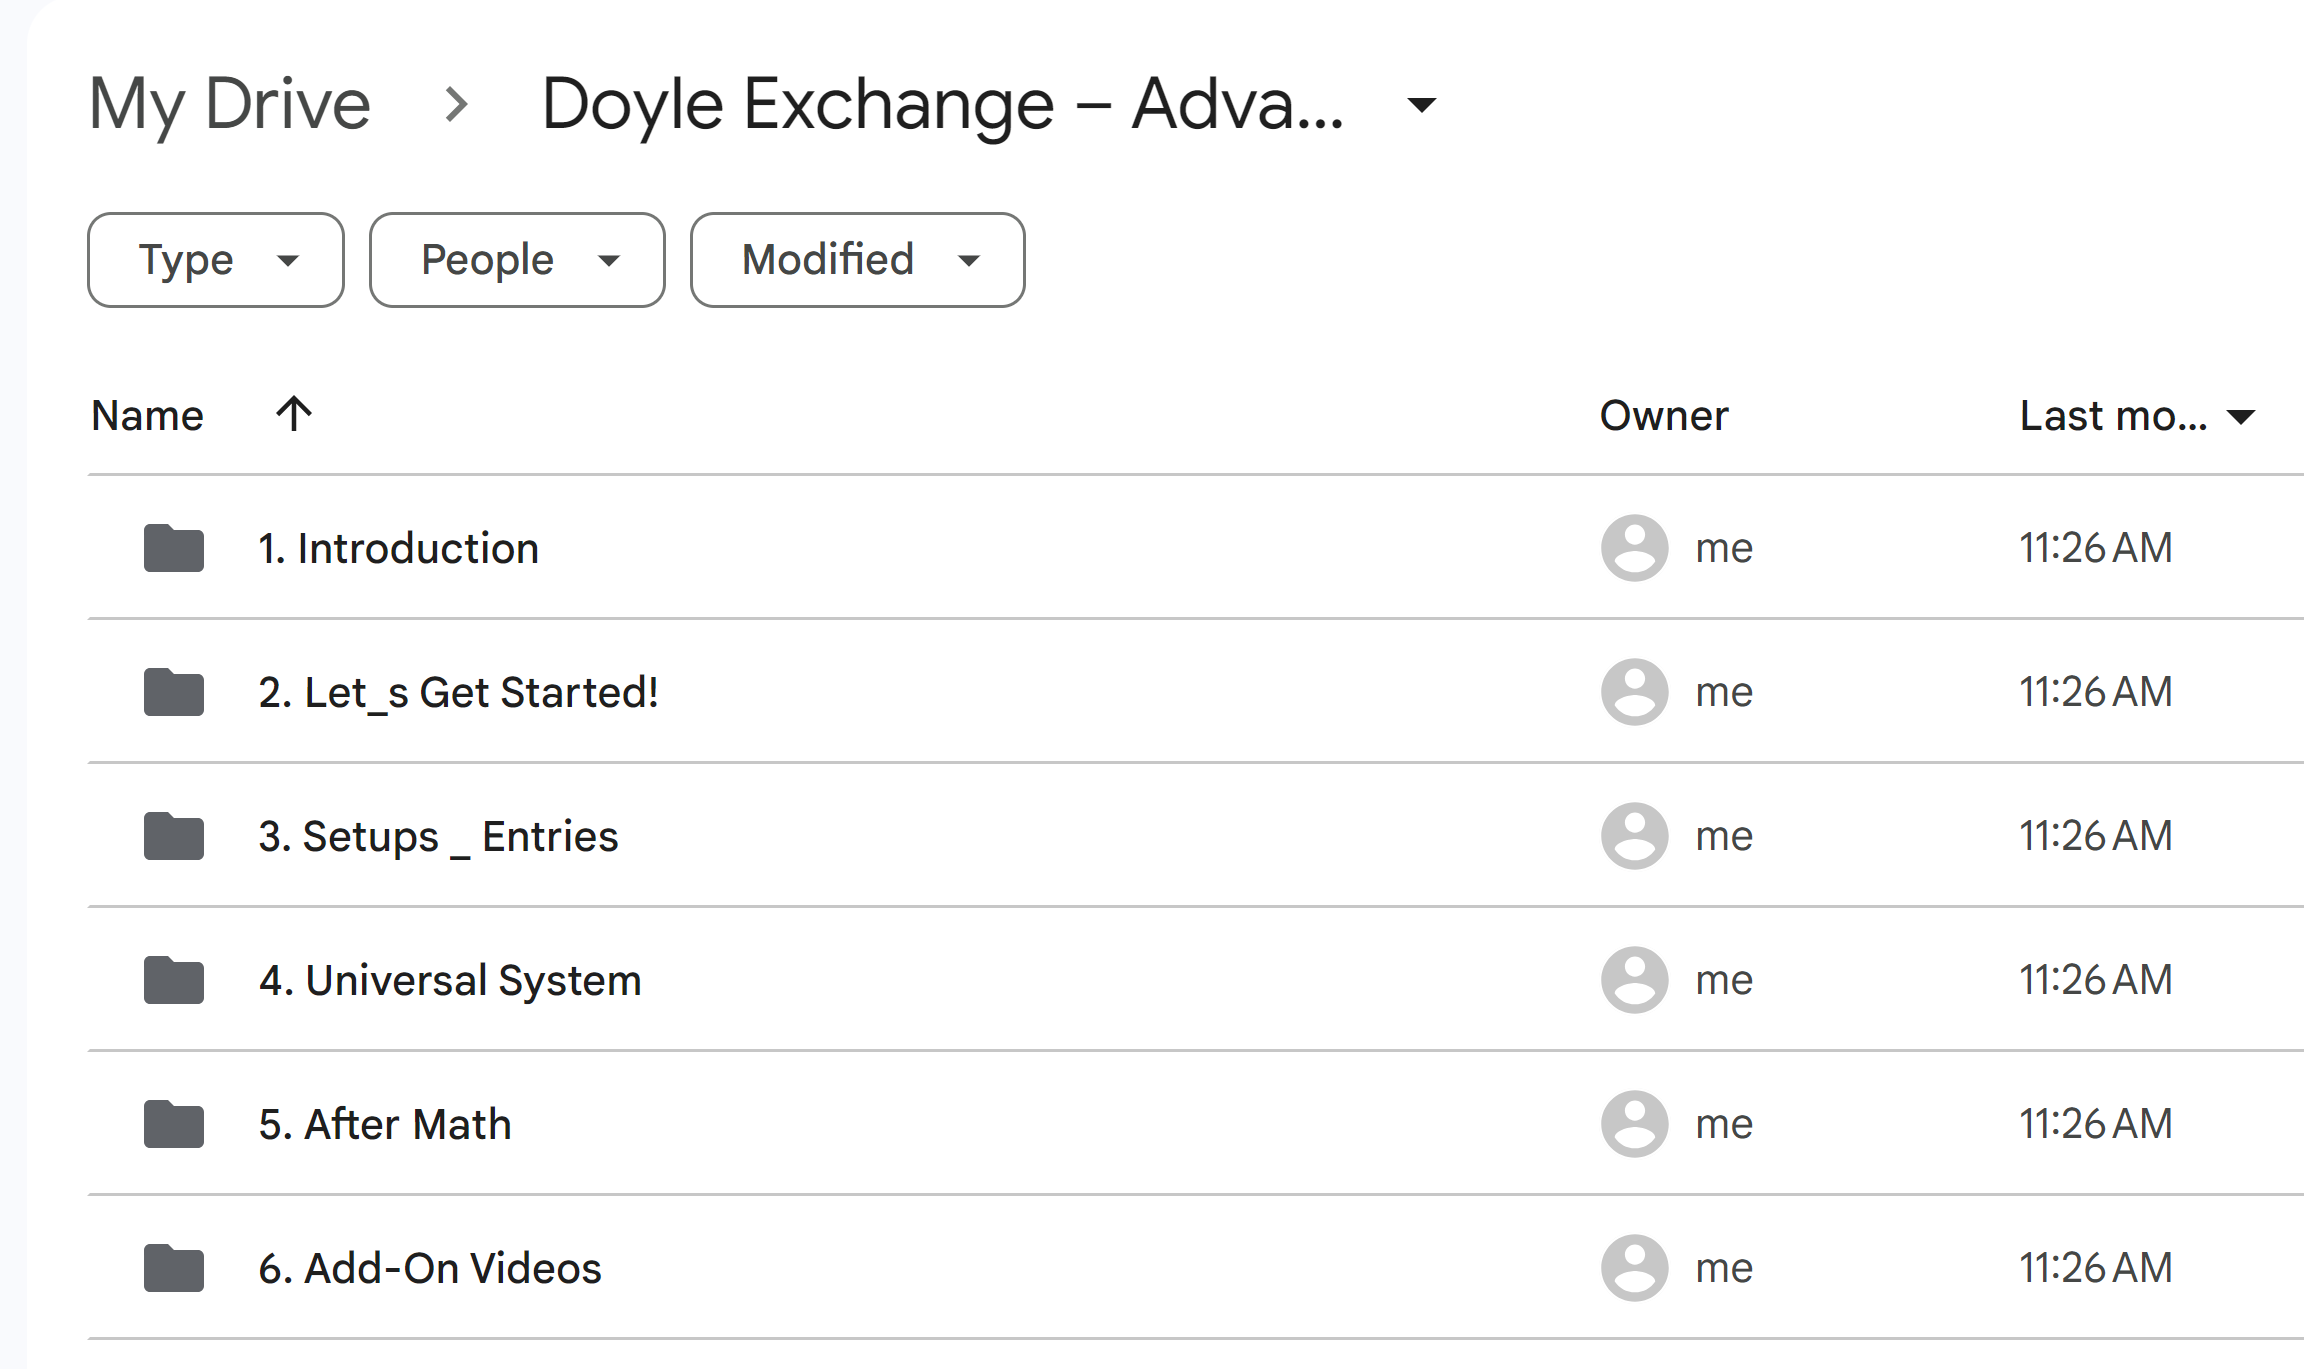 Doyle Exchange Advanced Day Trading Course